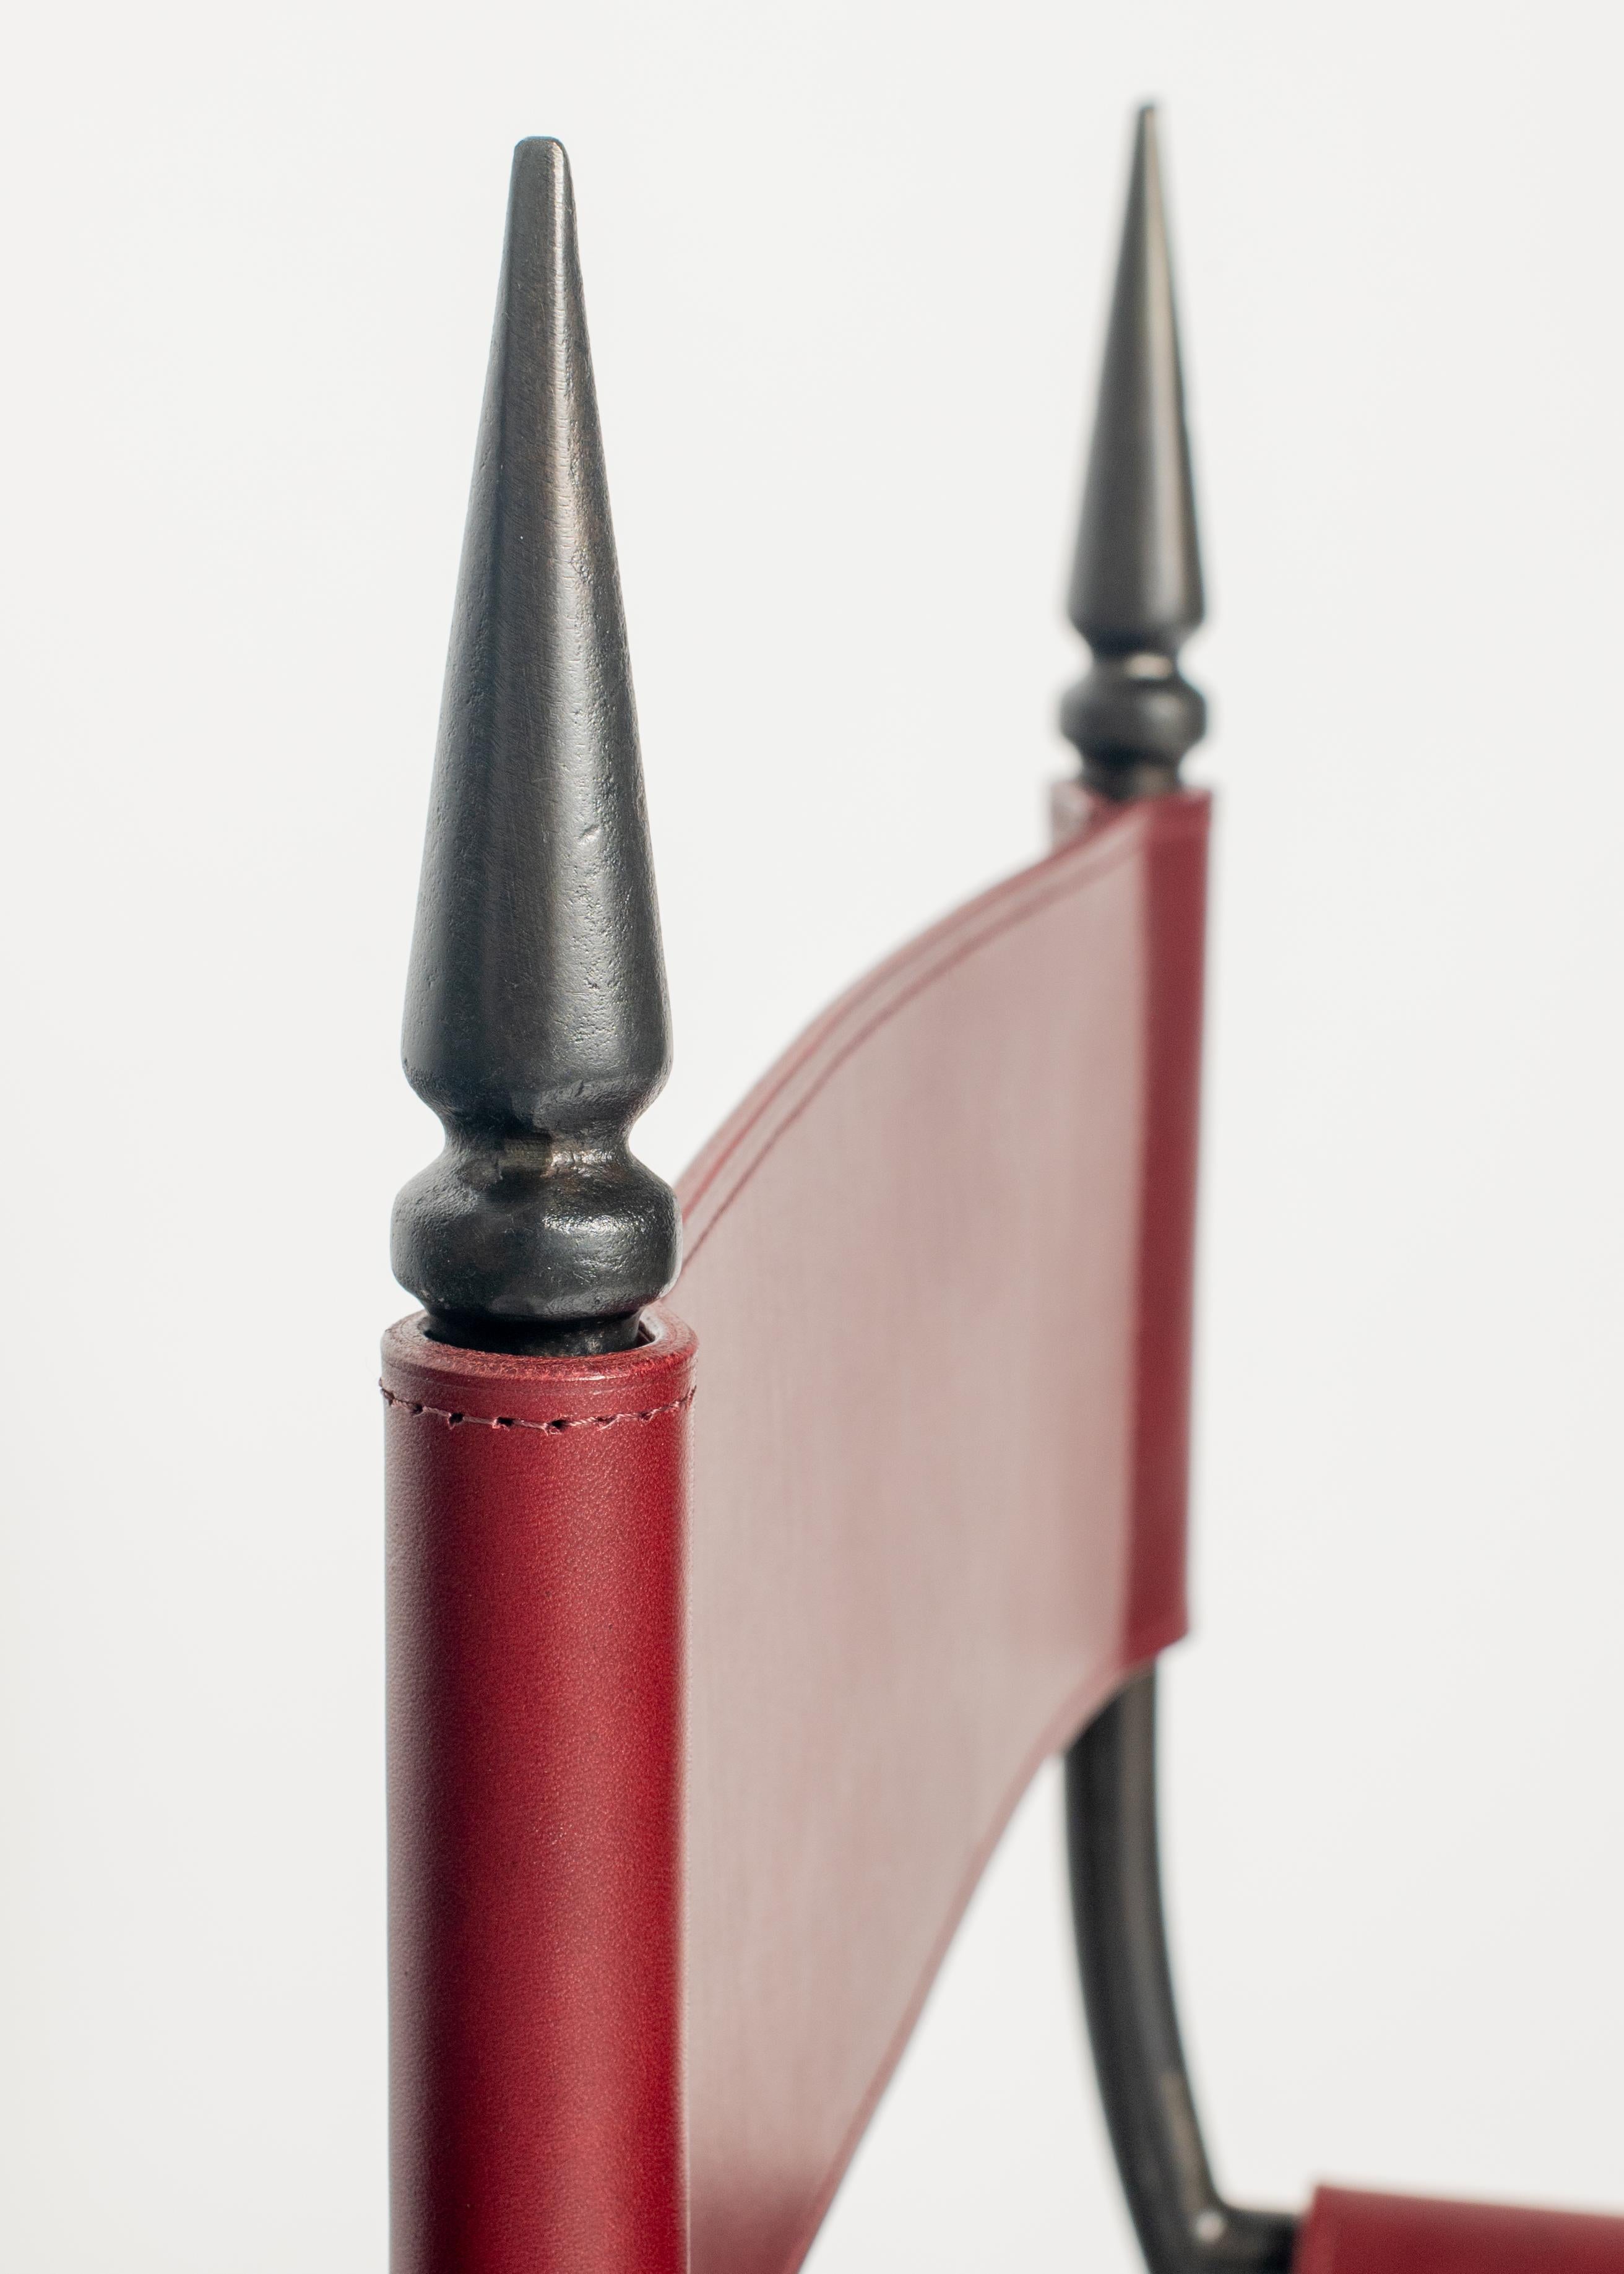 Our Belial Bar Stools subvert the intention of the classic Savonarola chair that was meant to demonize secular art and culture. By incorporating spikes, gothic arches, and oxblood leather, our version epitomizes beauty in its most nefarious